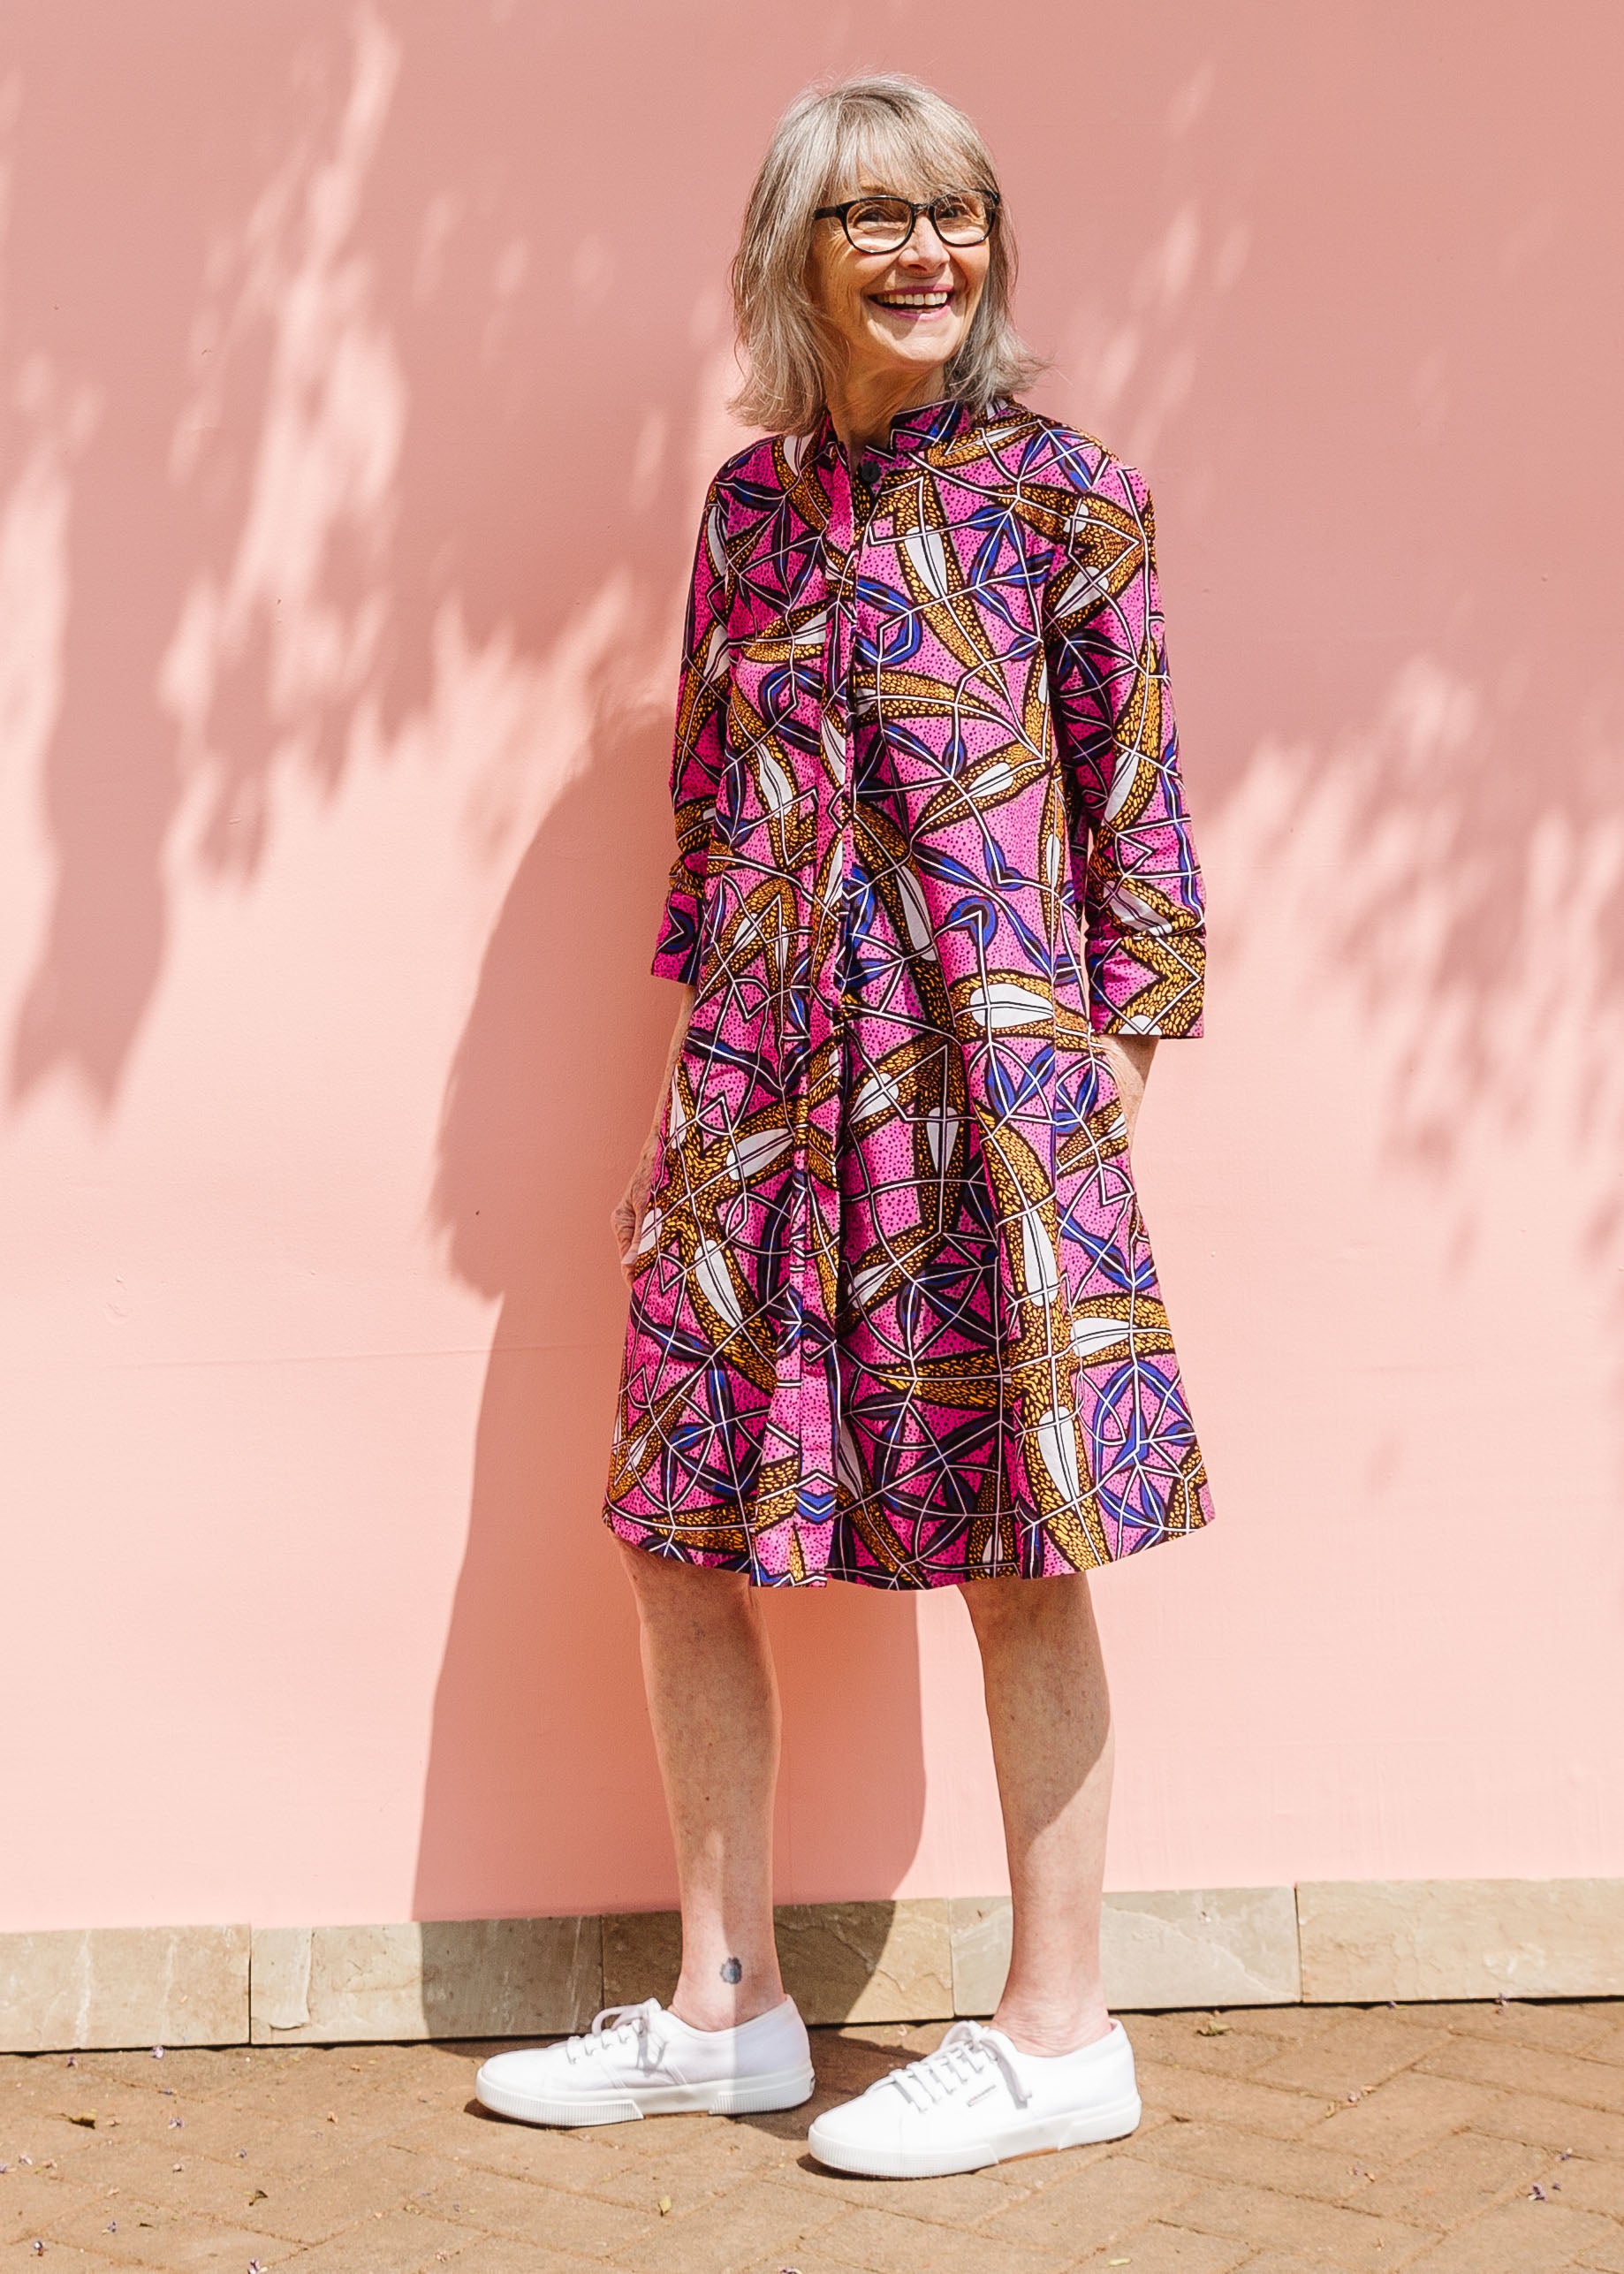 Model wearing a pink dress with floral yellow, blue and white print.